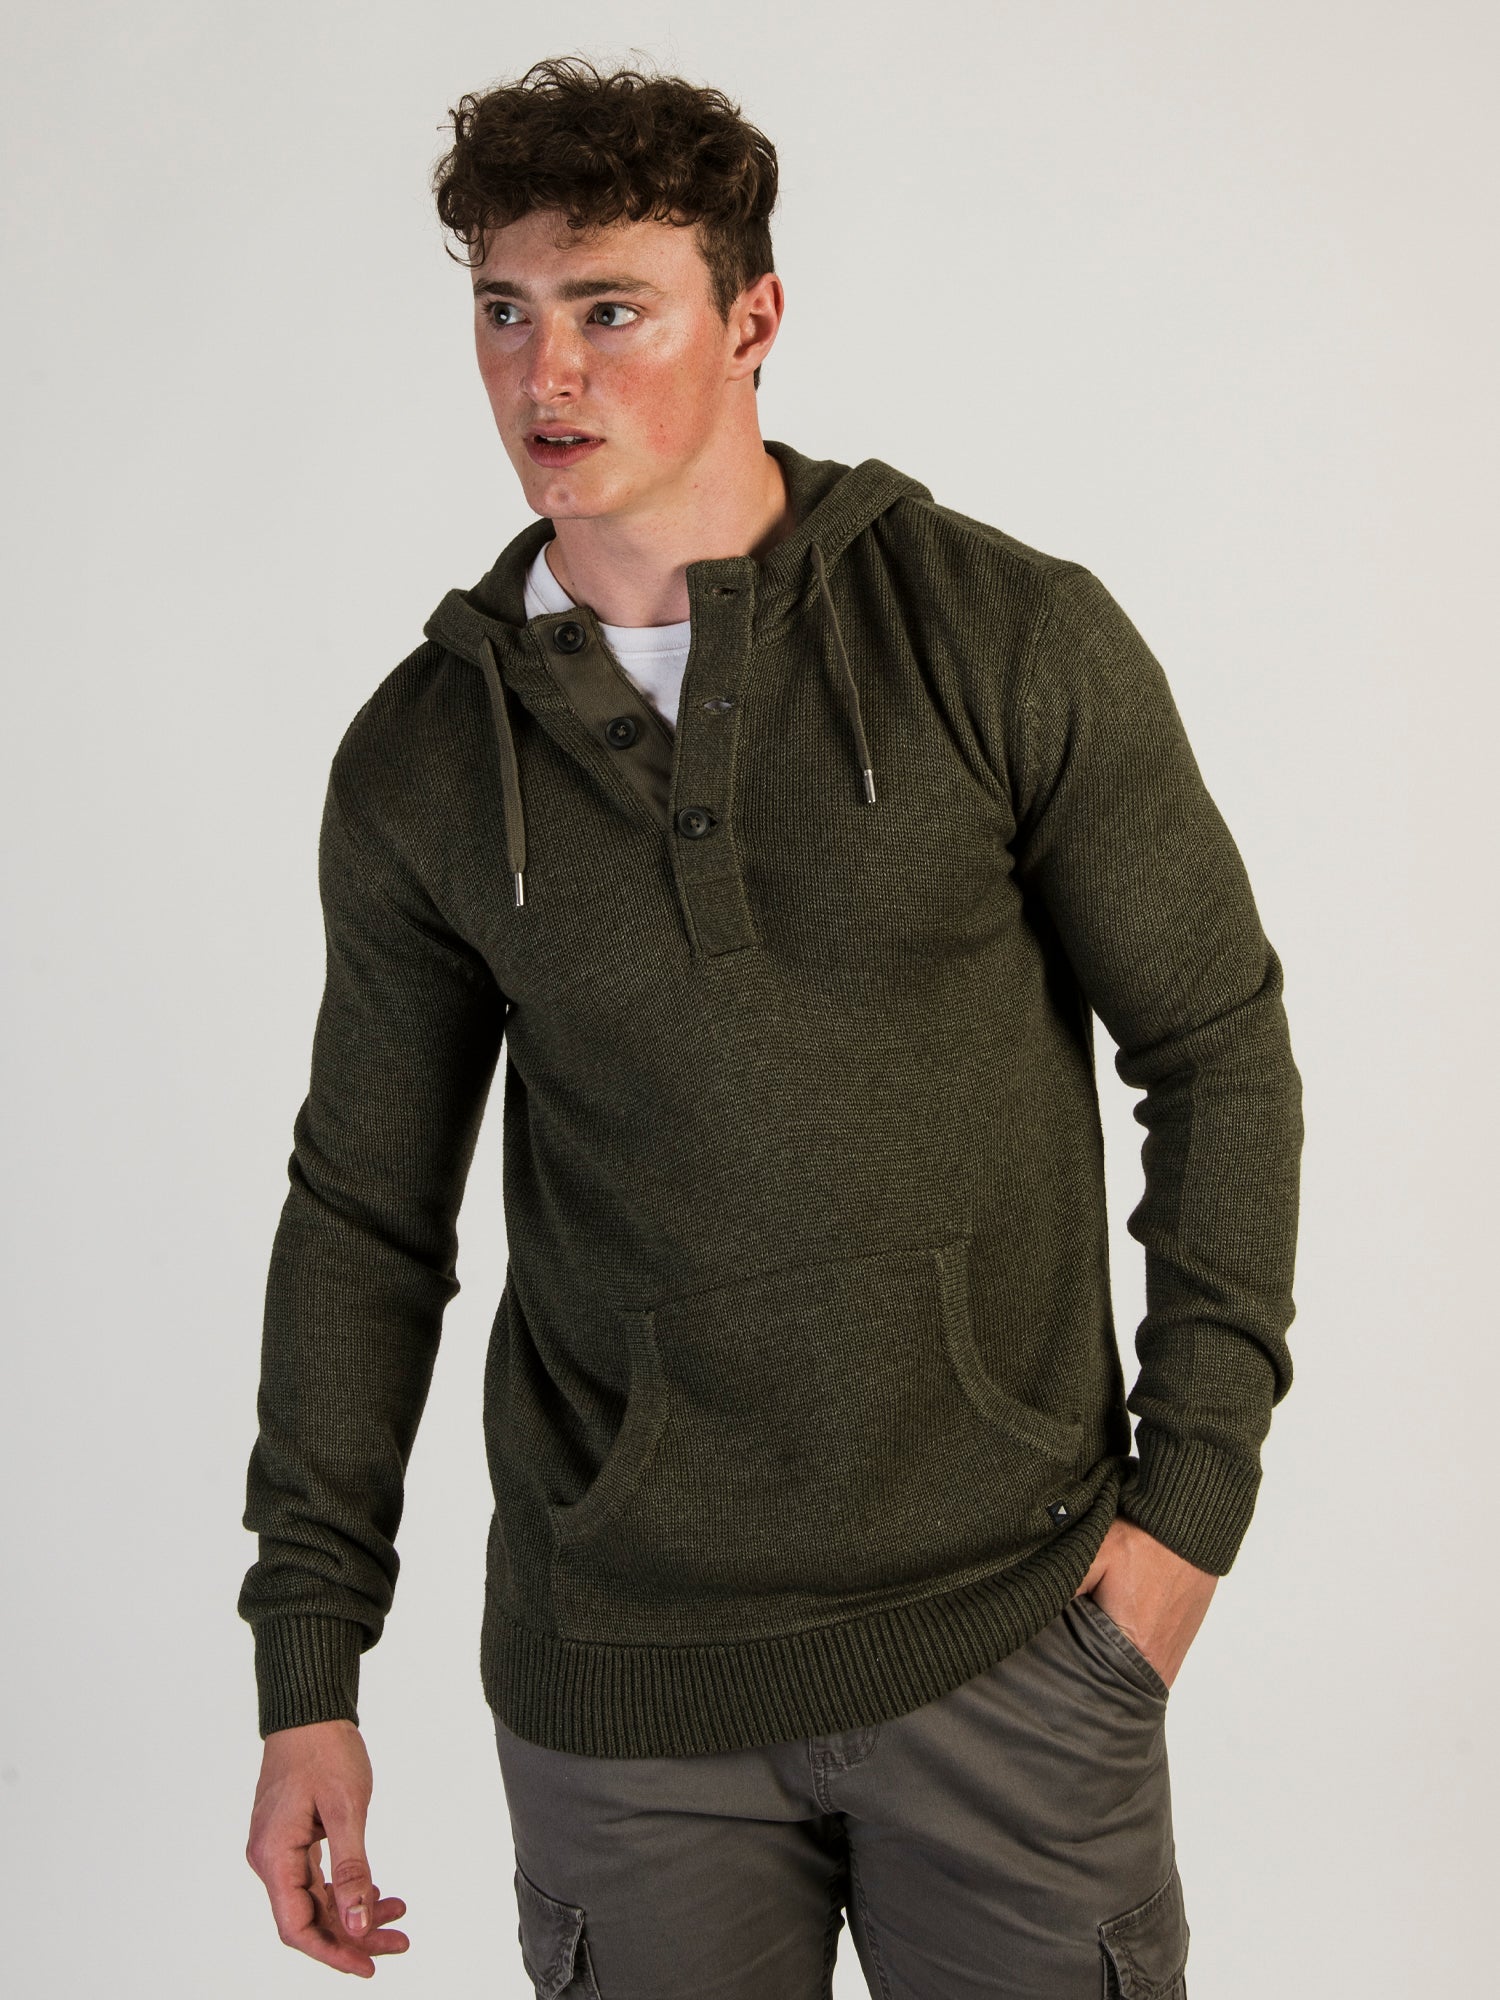 Mens Sale Hoodies & Sweaters - Shop Now | Boathouse